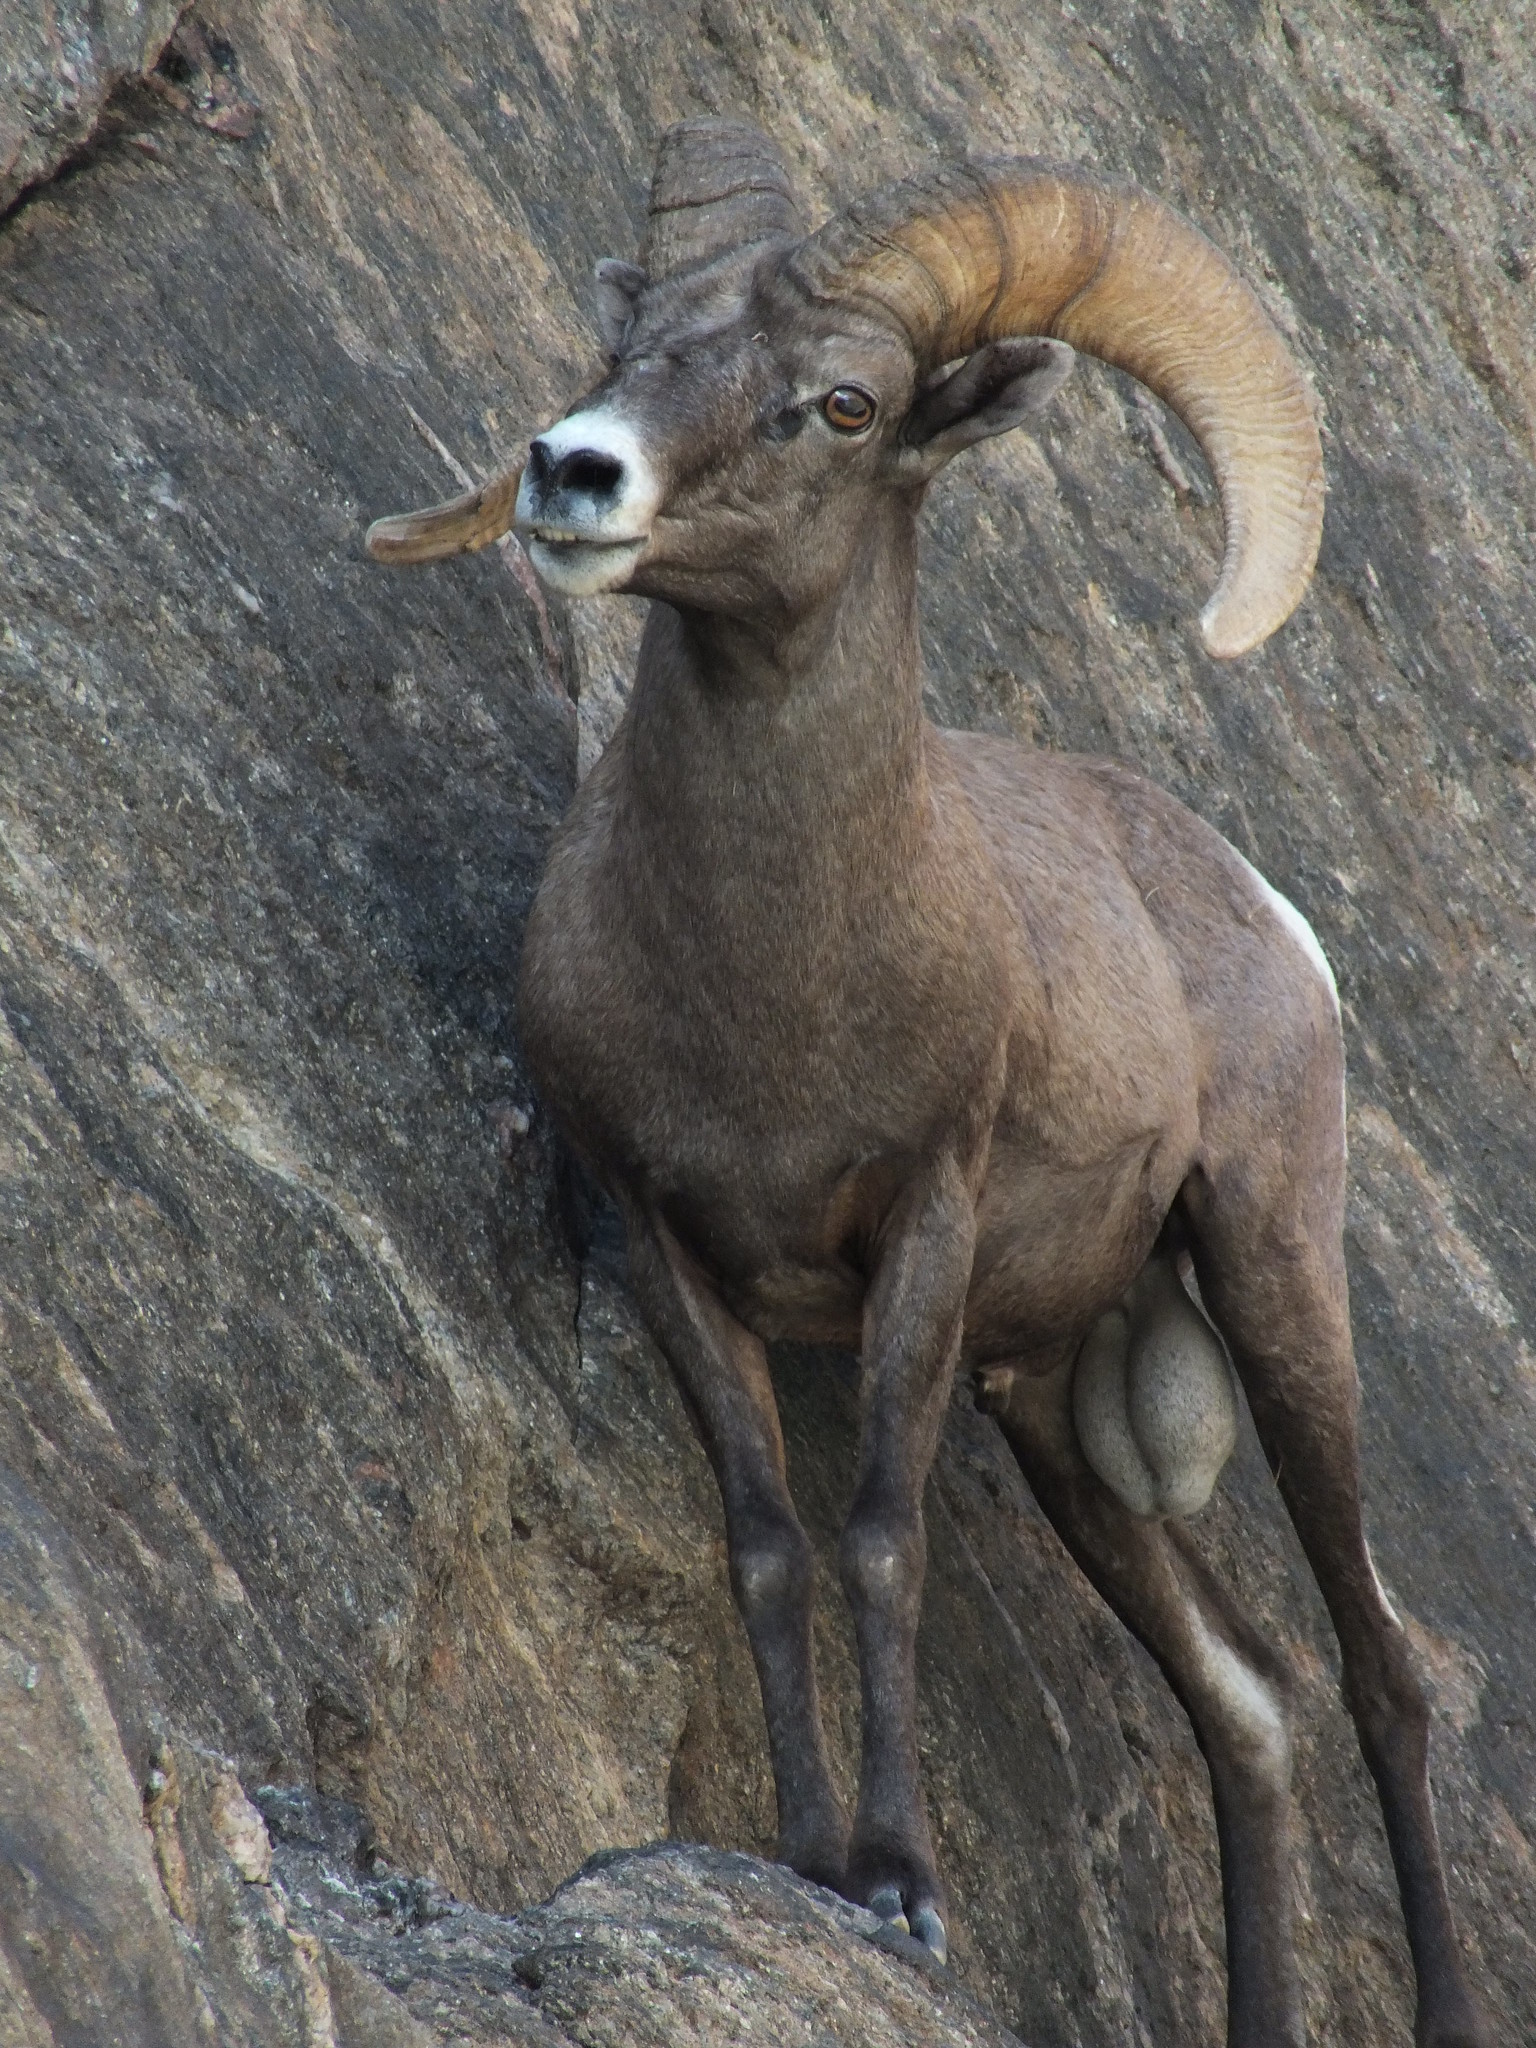 Native desert bighorn sheep in ecologically intact areas are less